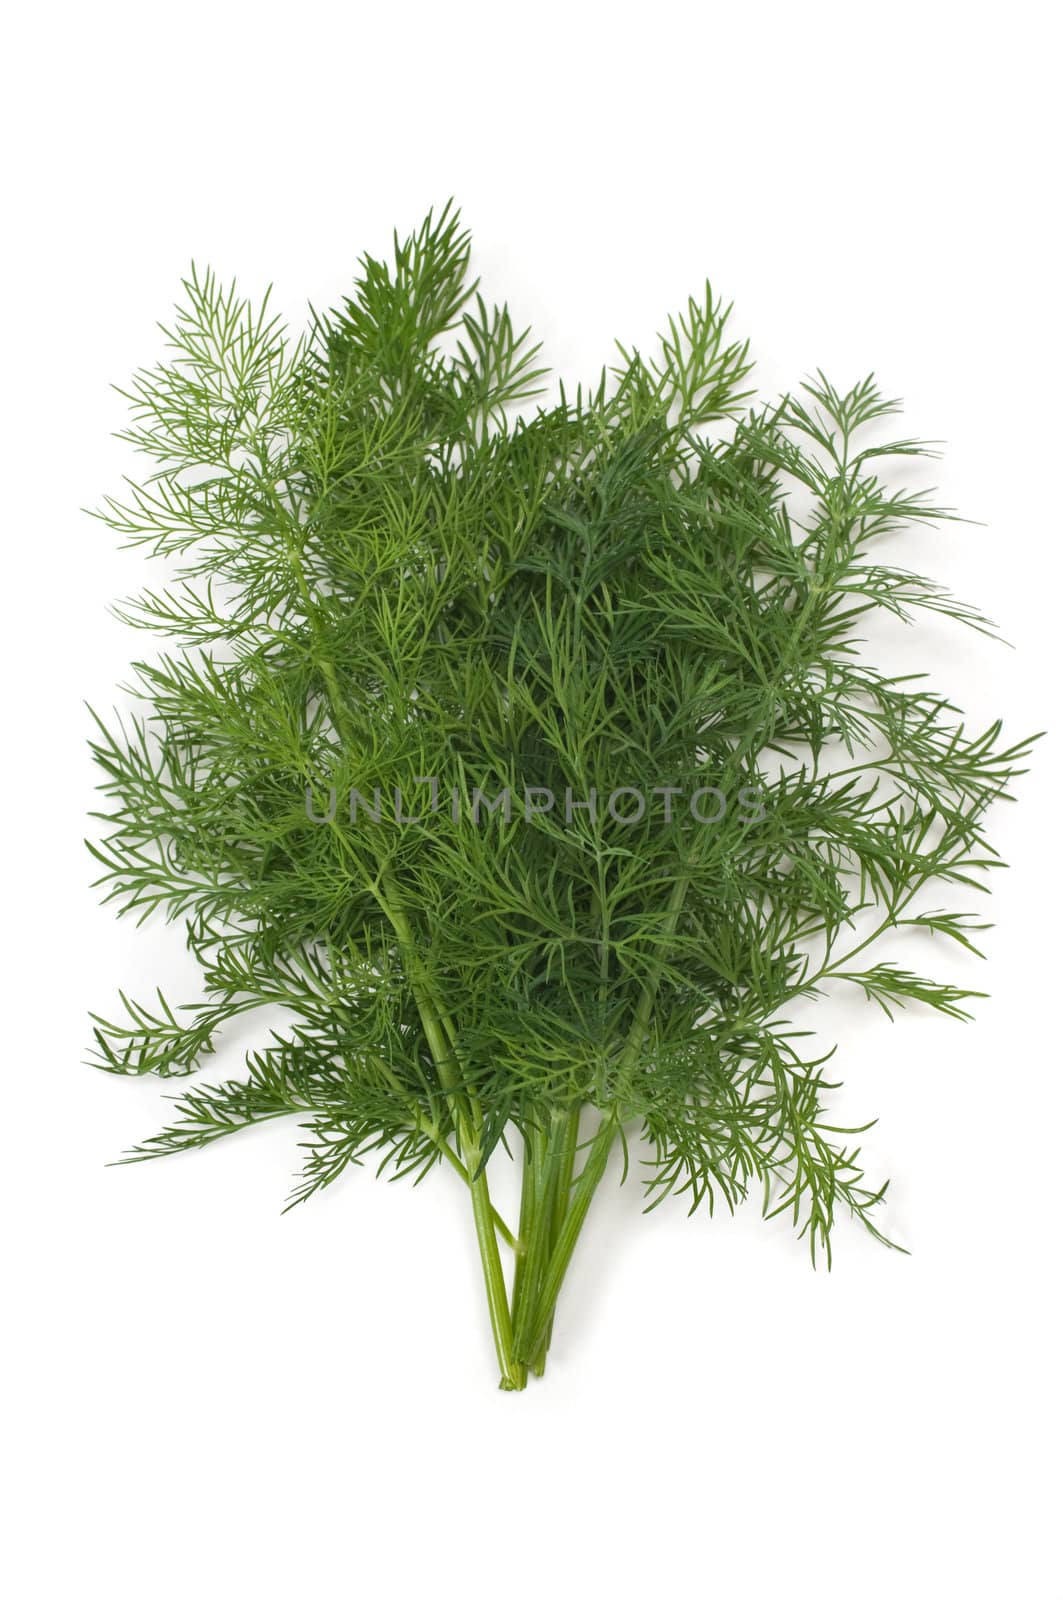 Dill Herb by BVDC